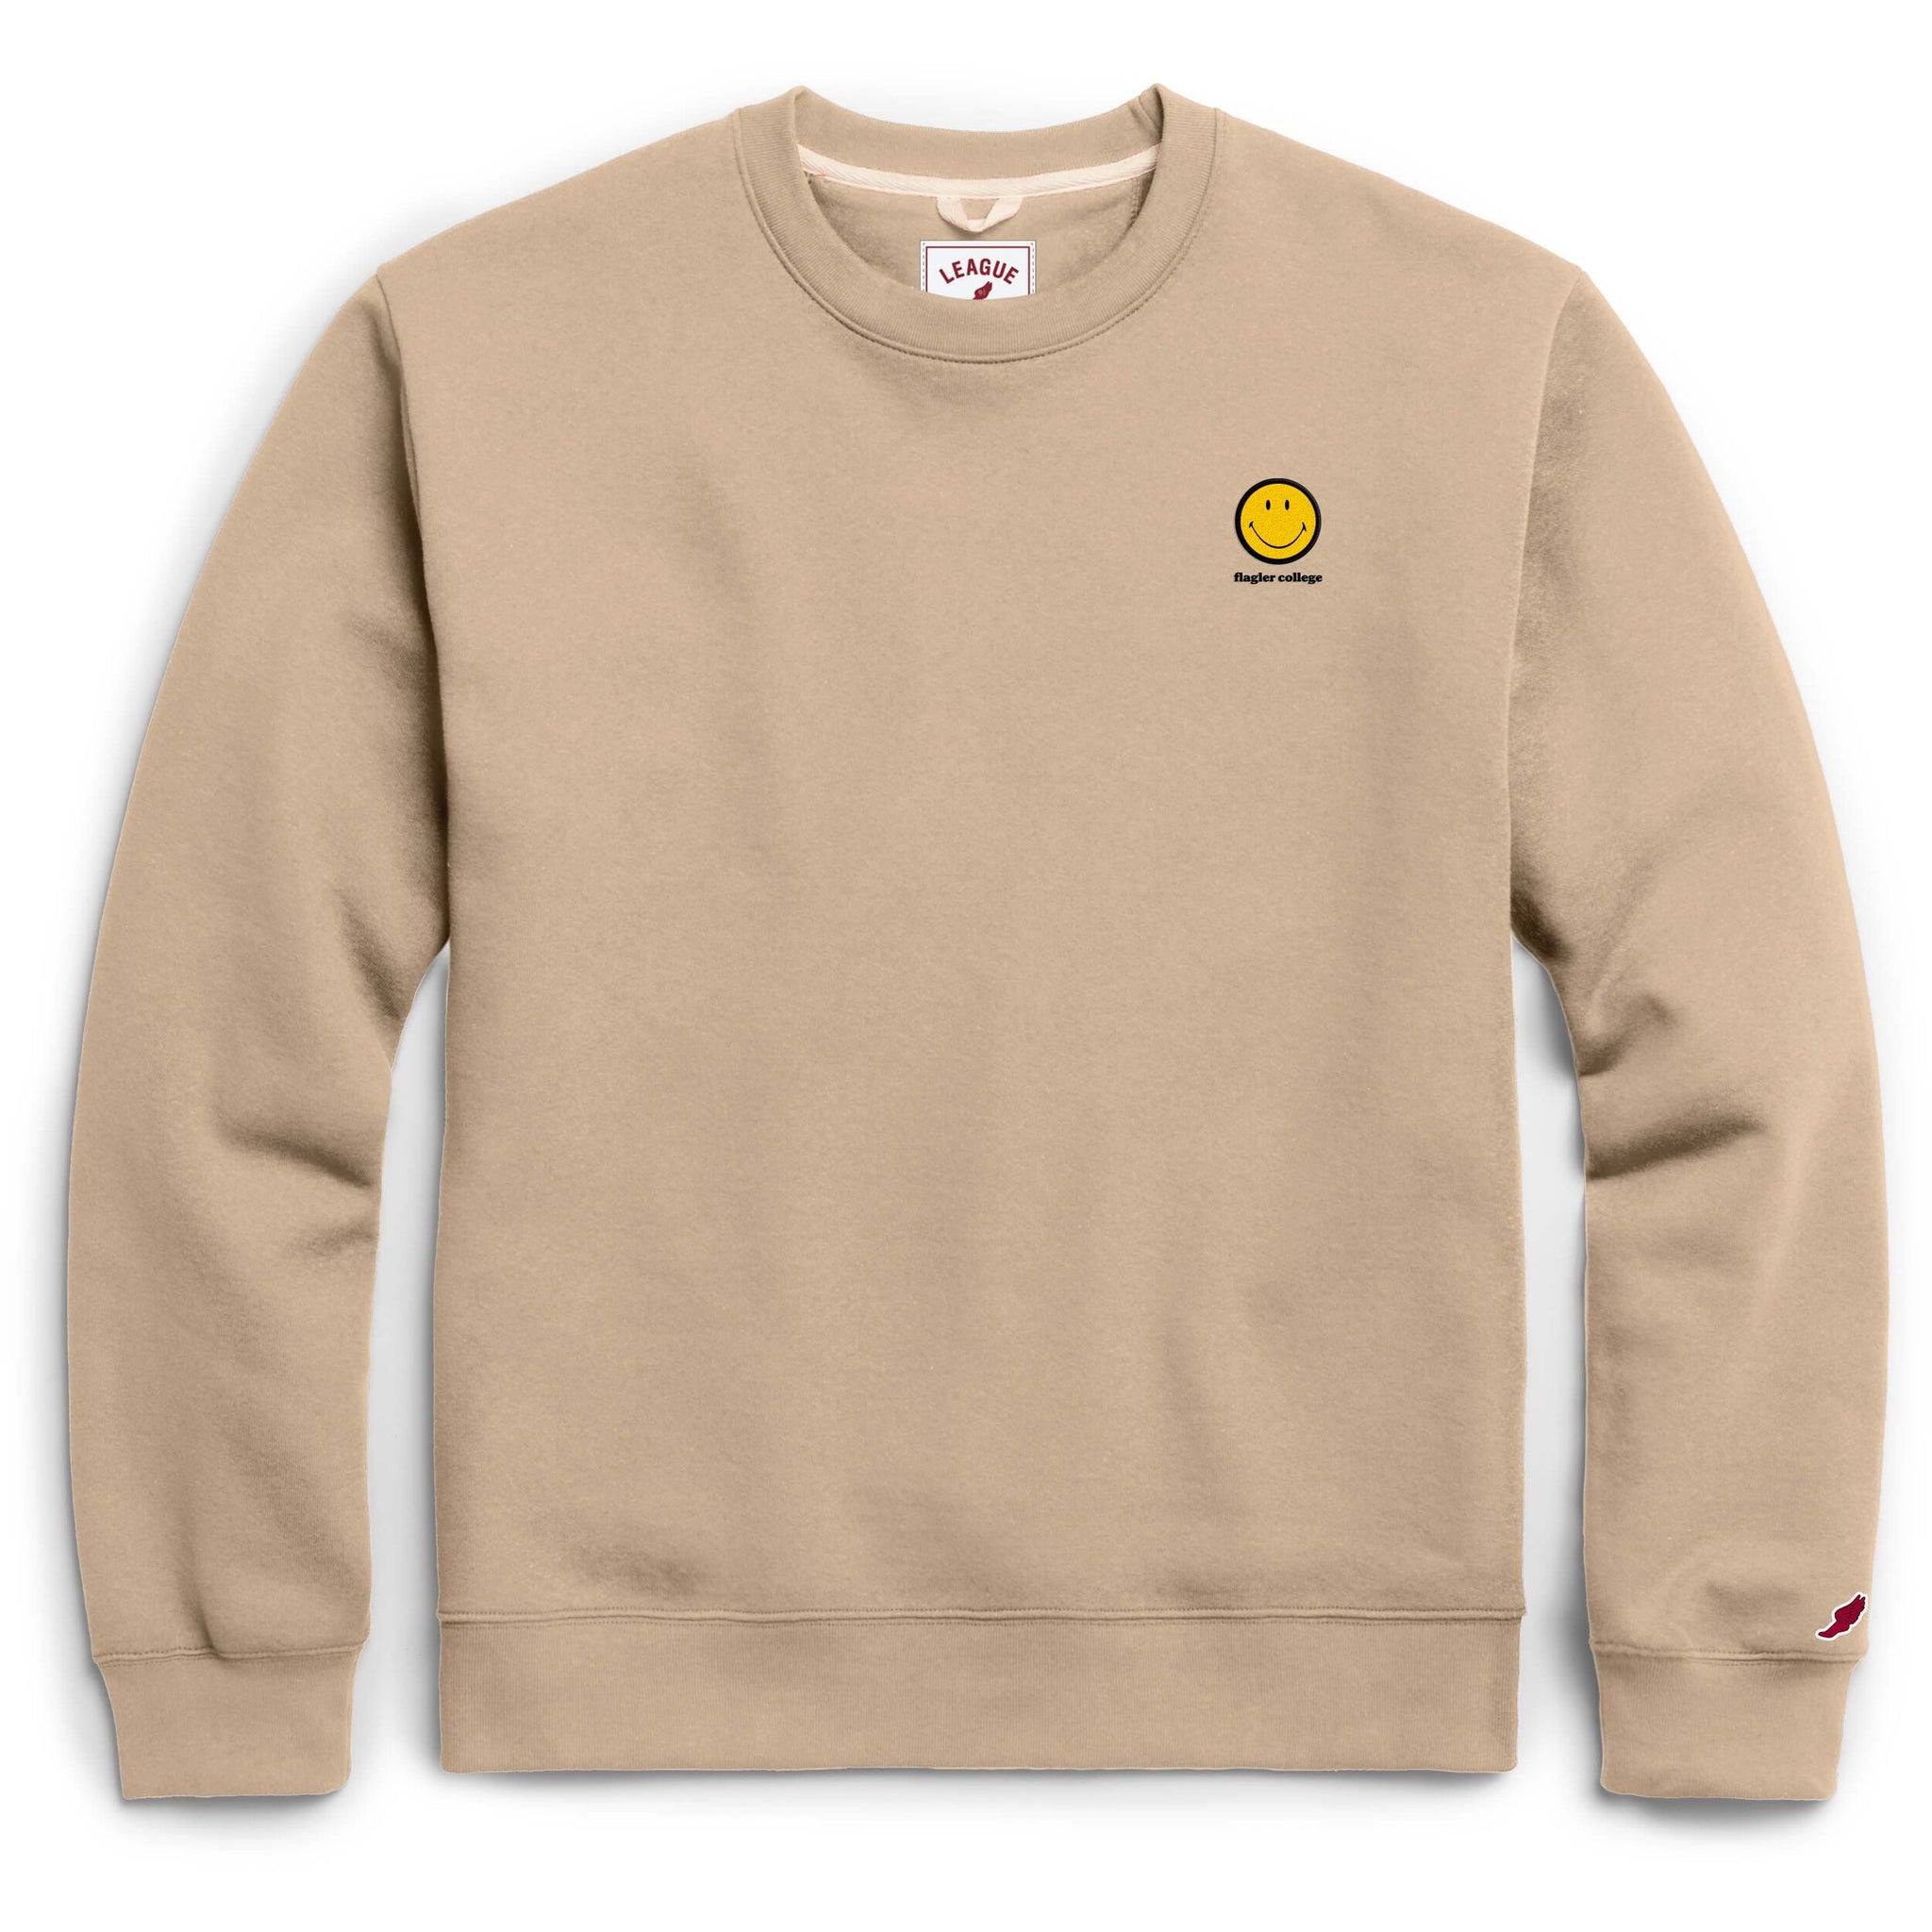 Beige crewneck with yellow smiley face patch over black imprint saying Flagler College